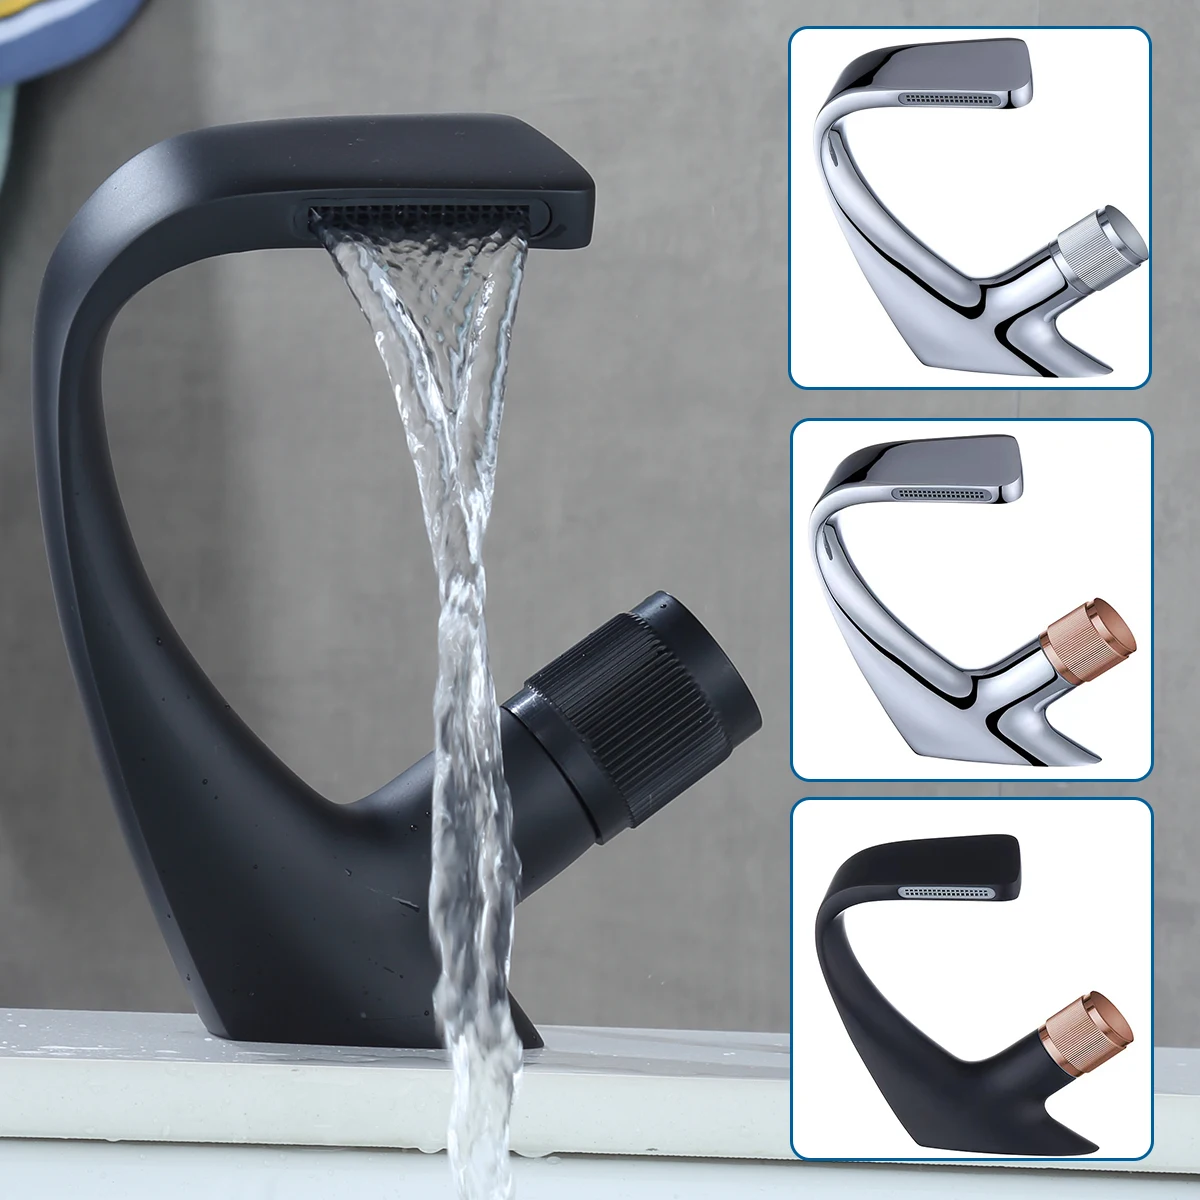 

Black Faucet Bathroom Sink Faucets Hot Cold Water Mixer Crane Deck Mounted Single Hole Bath Tap Chrome Finished MP-08